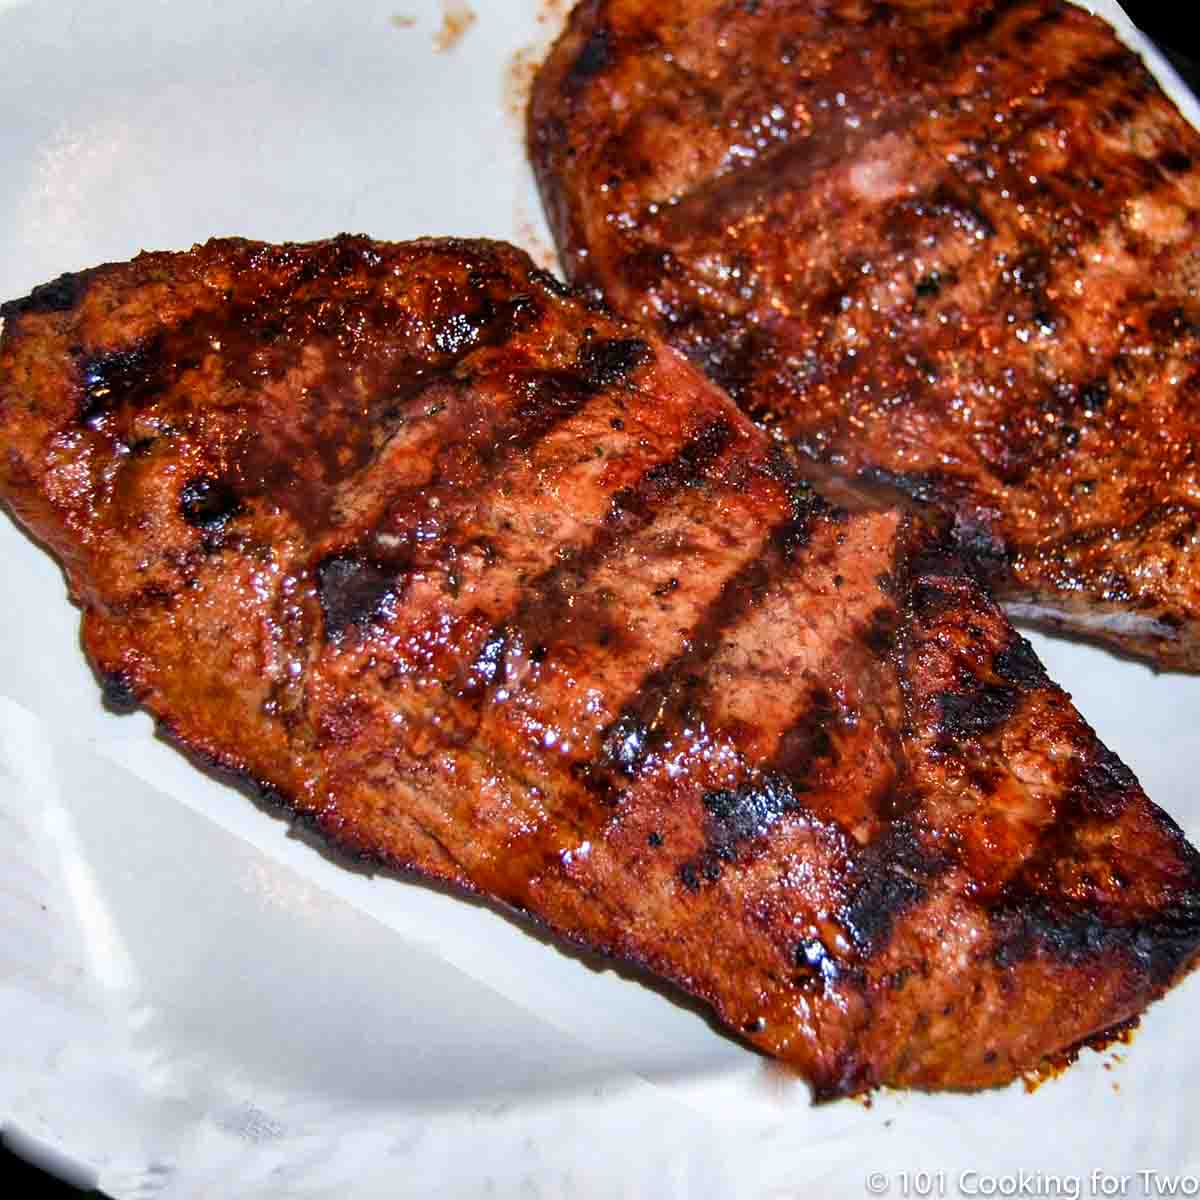 https://www.101cookingfortwo.com/wp-content/uploads/2023/04/Grilled-sirolin-on-white-plate-C.jpg